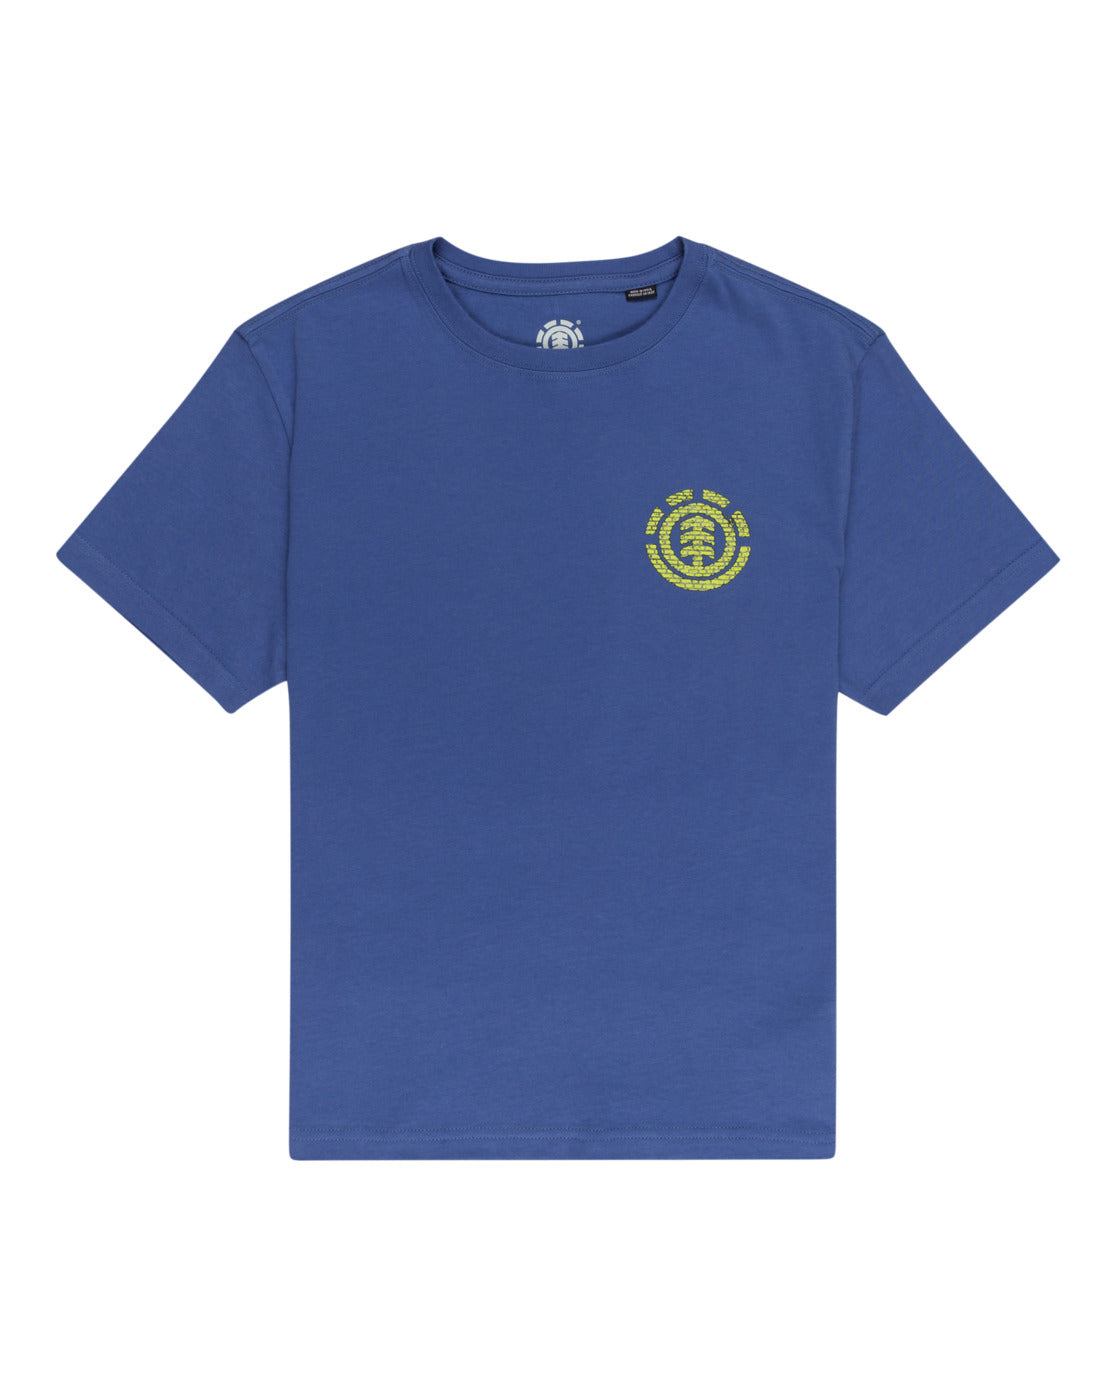 ELEMENT - WILD & FAST SS YOUTH TEE - NOUVEAN NAVY